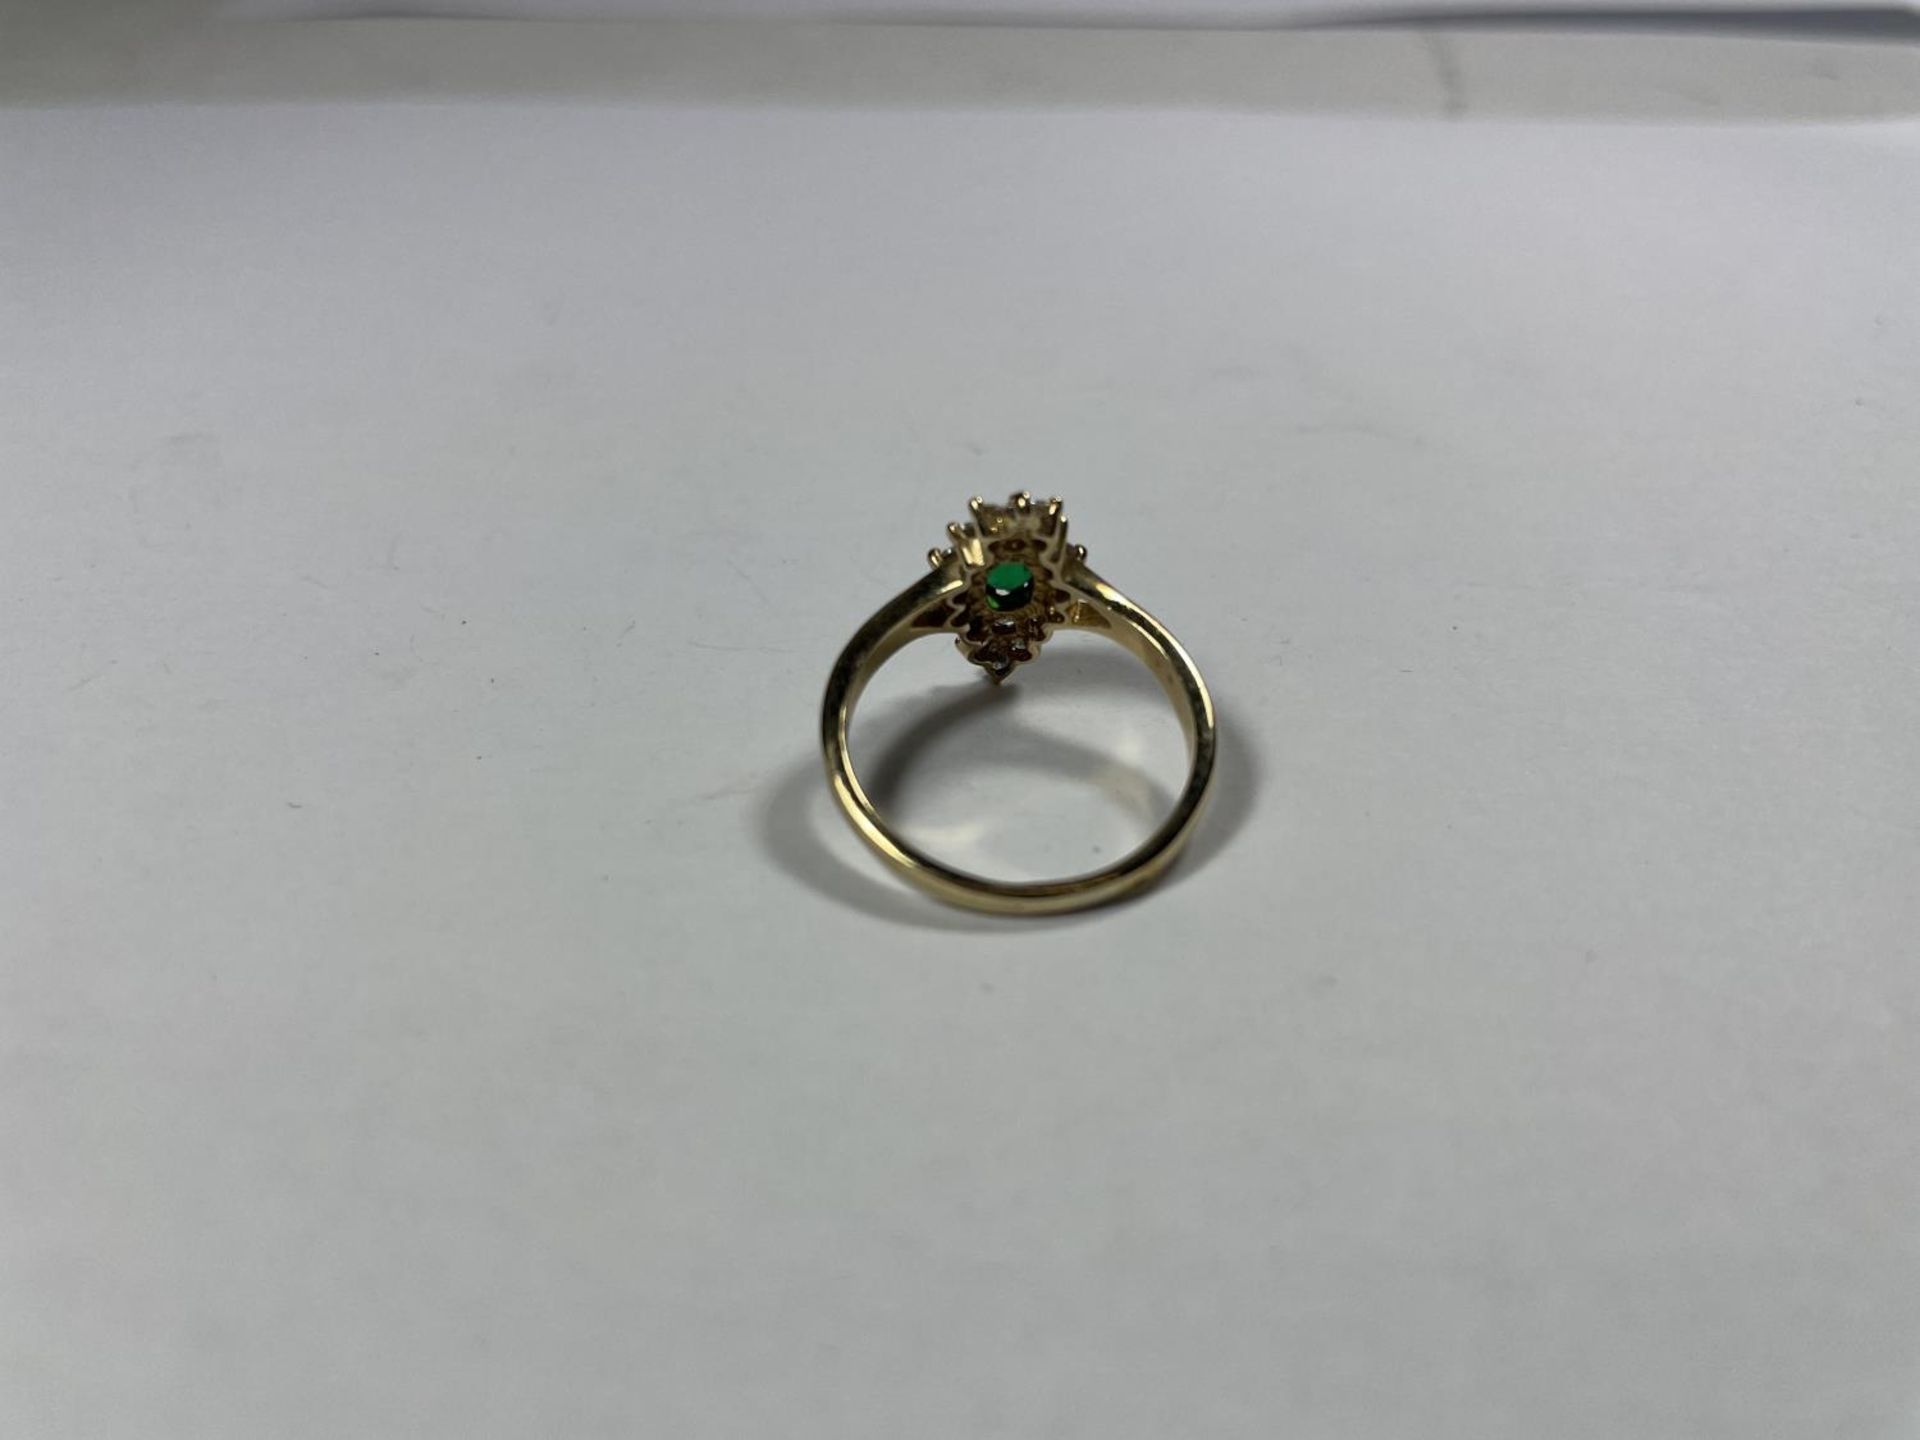 A 9 CARAT GOLD RING WITH CENTRE GREEN STONE SURROUNDED BY CUBIC ZIRCONIAS IN A DIAMOND SHAPE SIZE - Image 2 of 3